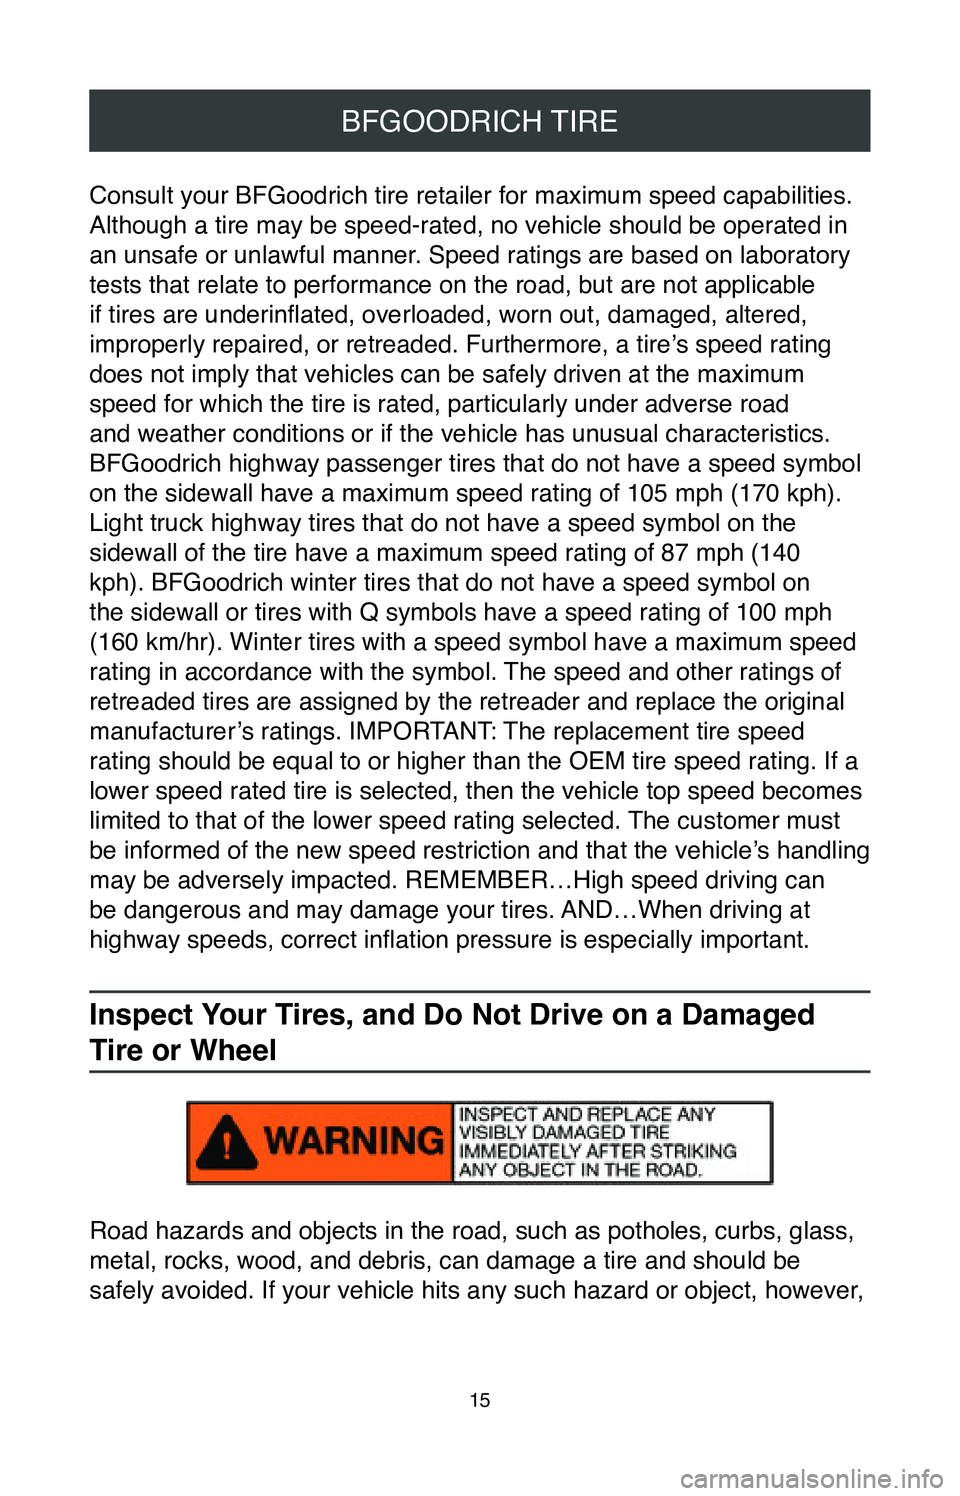 TOYOTA AVALON HYBRID 2020  Warranties & Maintenance Guides (in English) 15
BFGOODRICH TIRE
Consult your BFGoodrich tire retailer for maximum speed capabilities. 
Although a tire may be speed-rated, no vehicle should be operated in 
an unsafe or unlawful manner. Speed rati